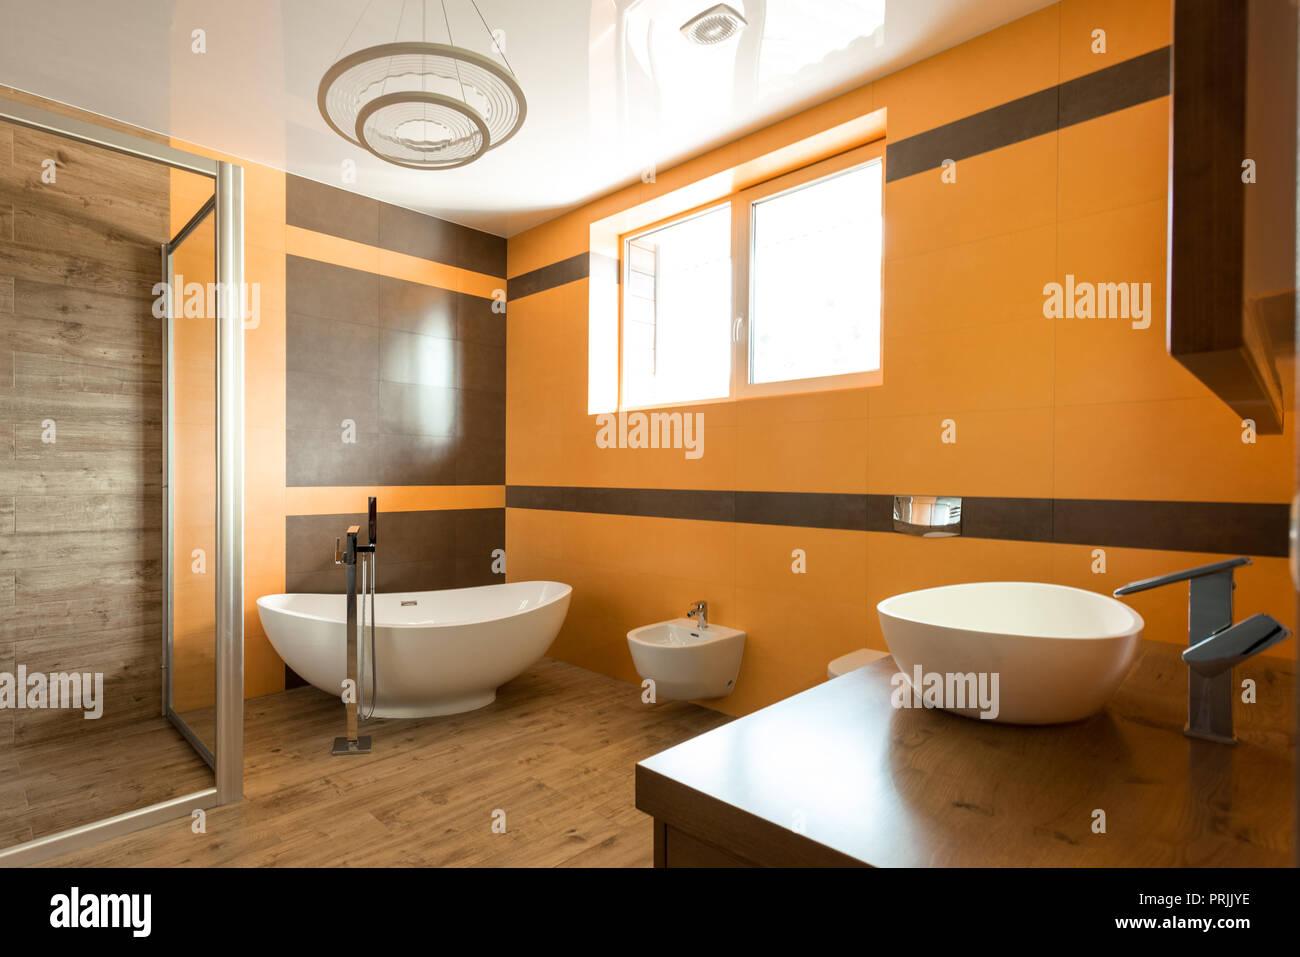 interior of bathroom in orange and white colors with bathtube, sink and bidet Stock Photo